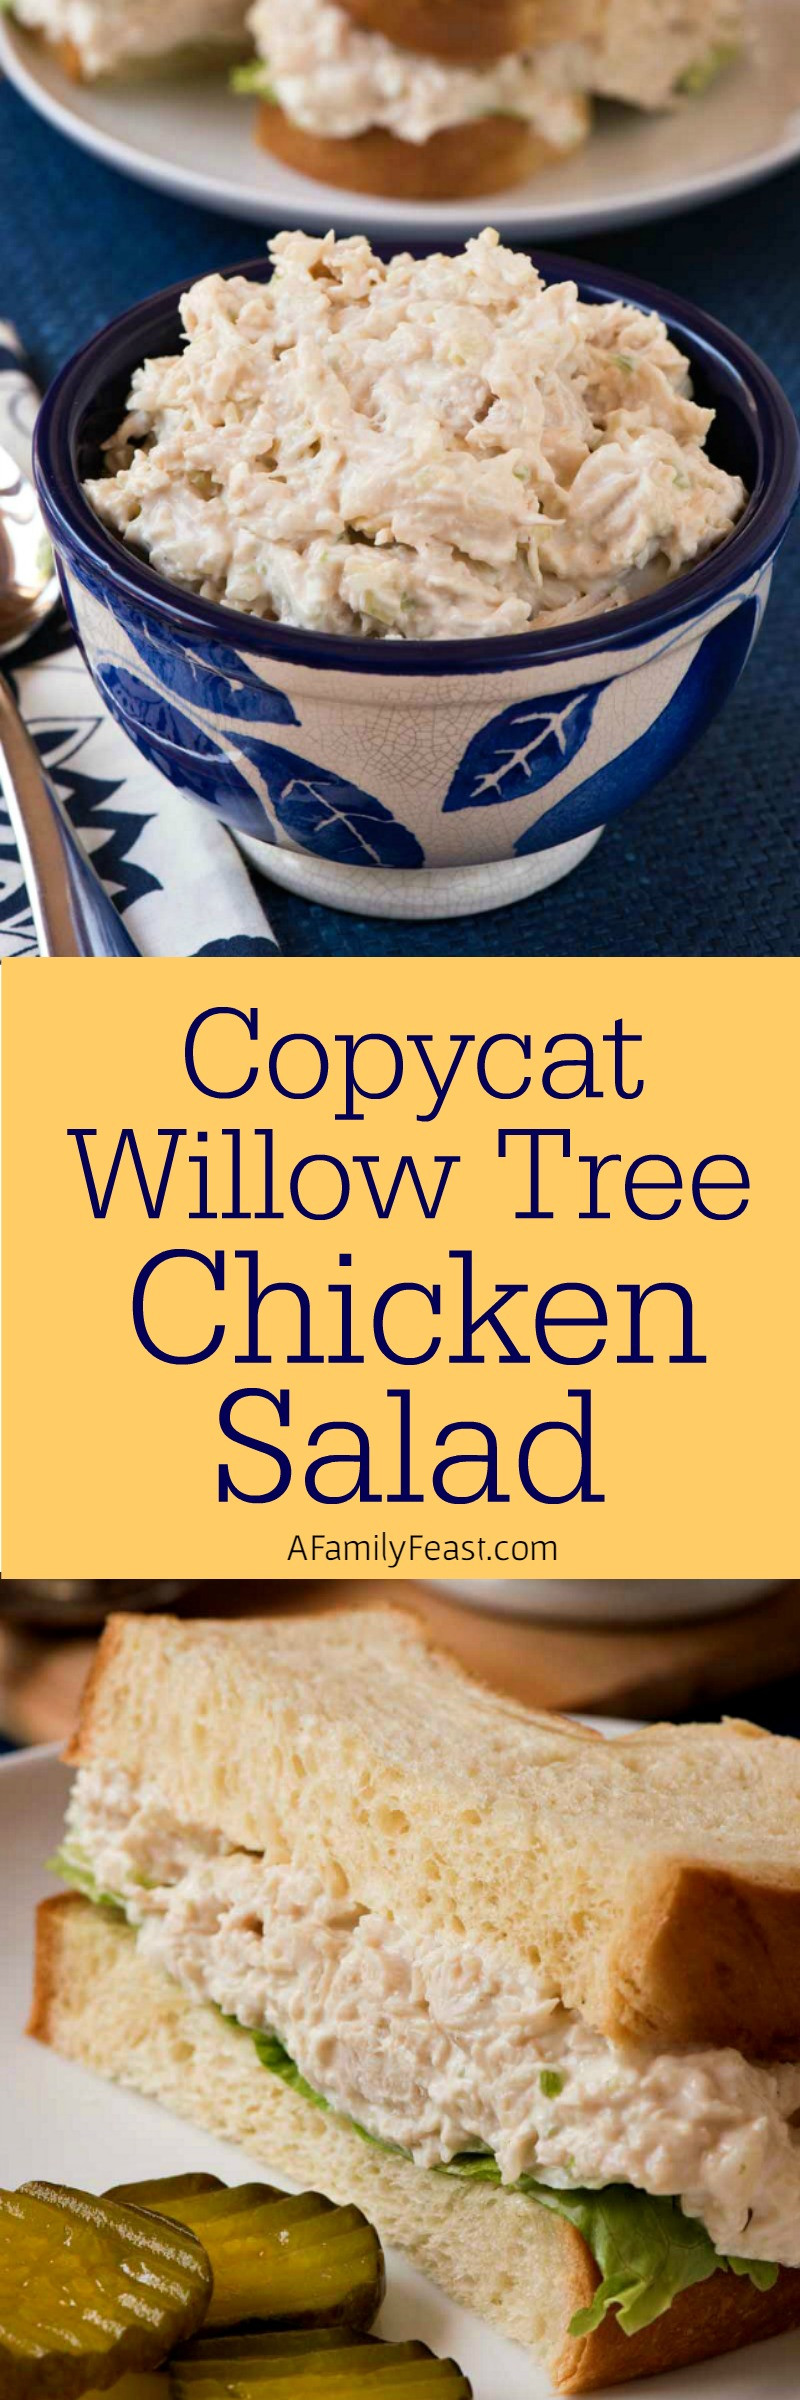 Willow Tree Chicken Salad
 Copycat Willow Tree Chicken Salad A Family Feast